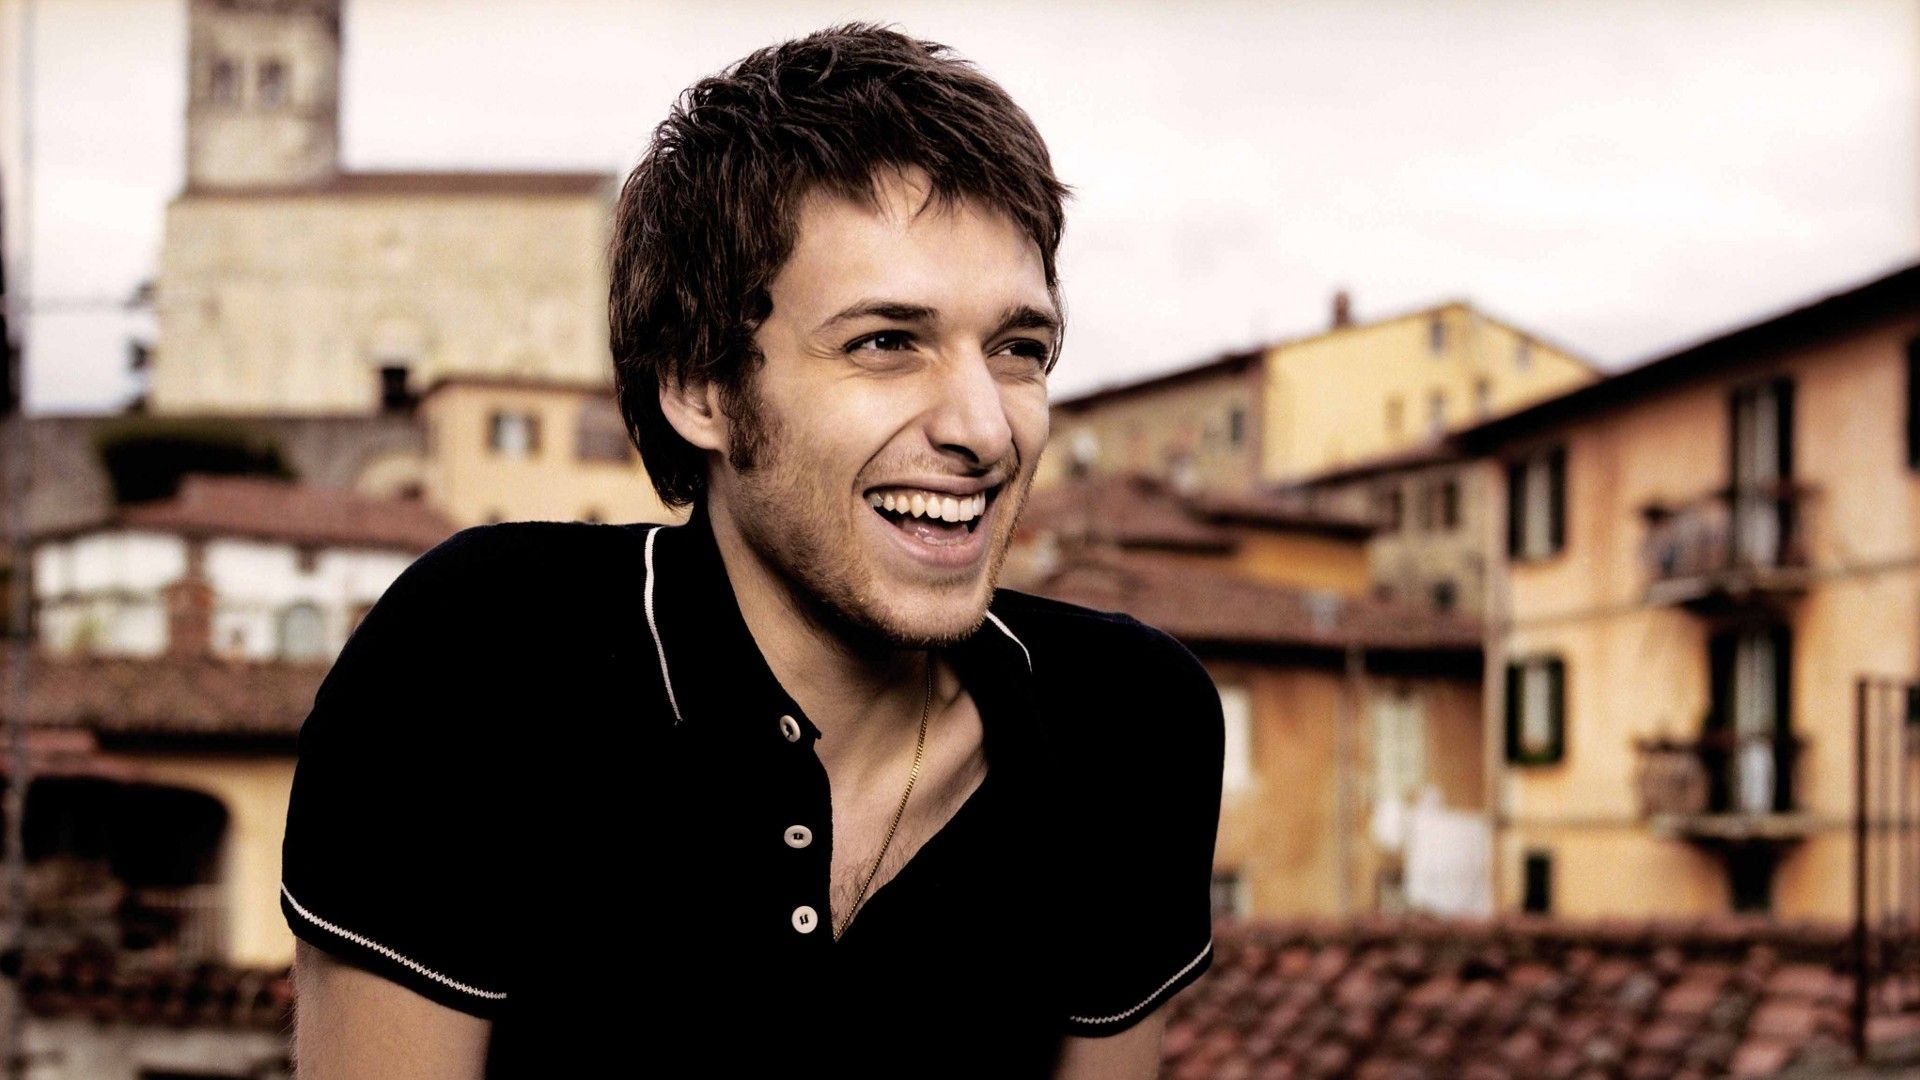 Paolo Nutini, Google Images, Paolo's music, Dynamic performer, 1920x1080 Full HD Desktop